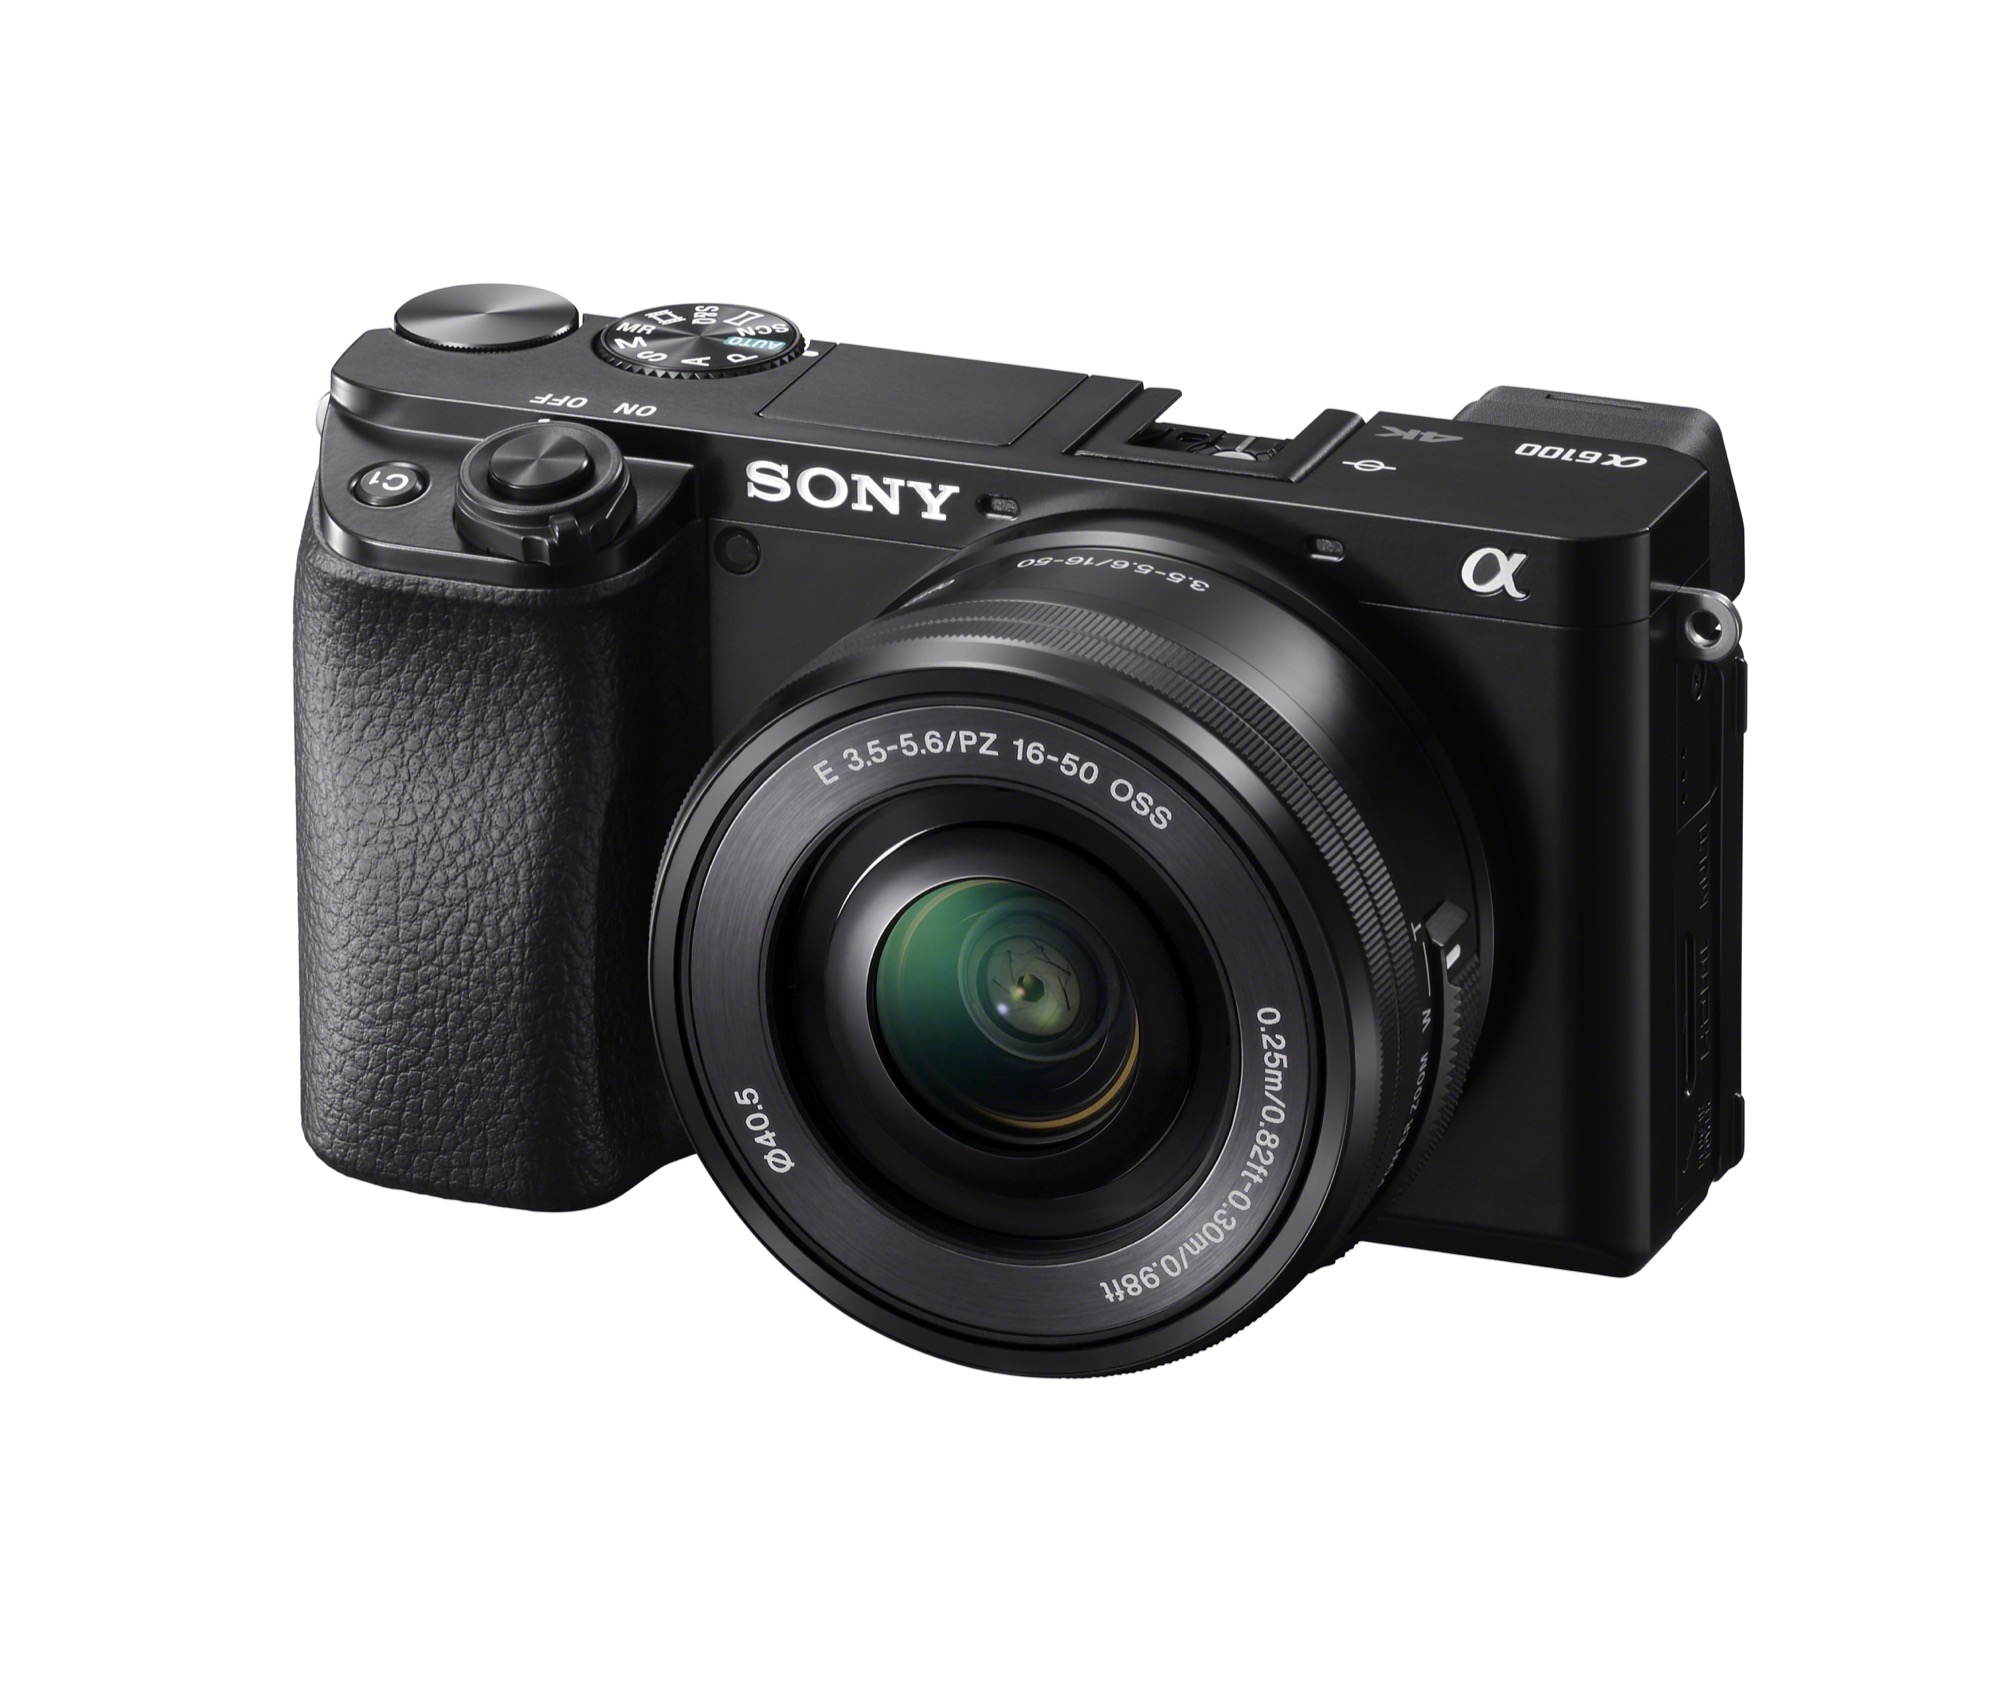 Sony's new a6600 flagship APS-C camera adds stabilization and over 